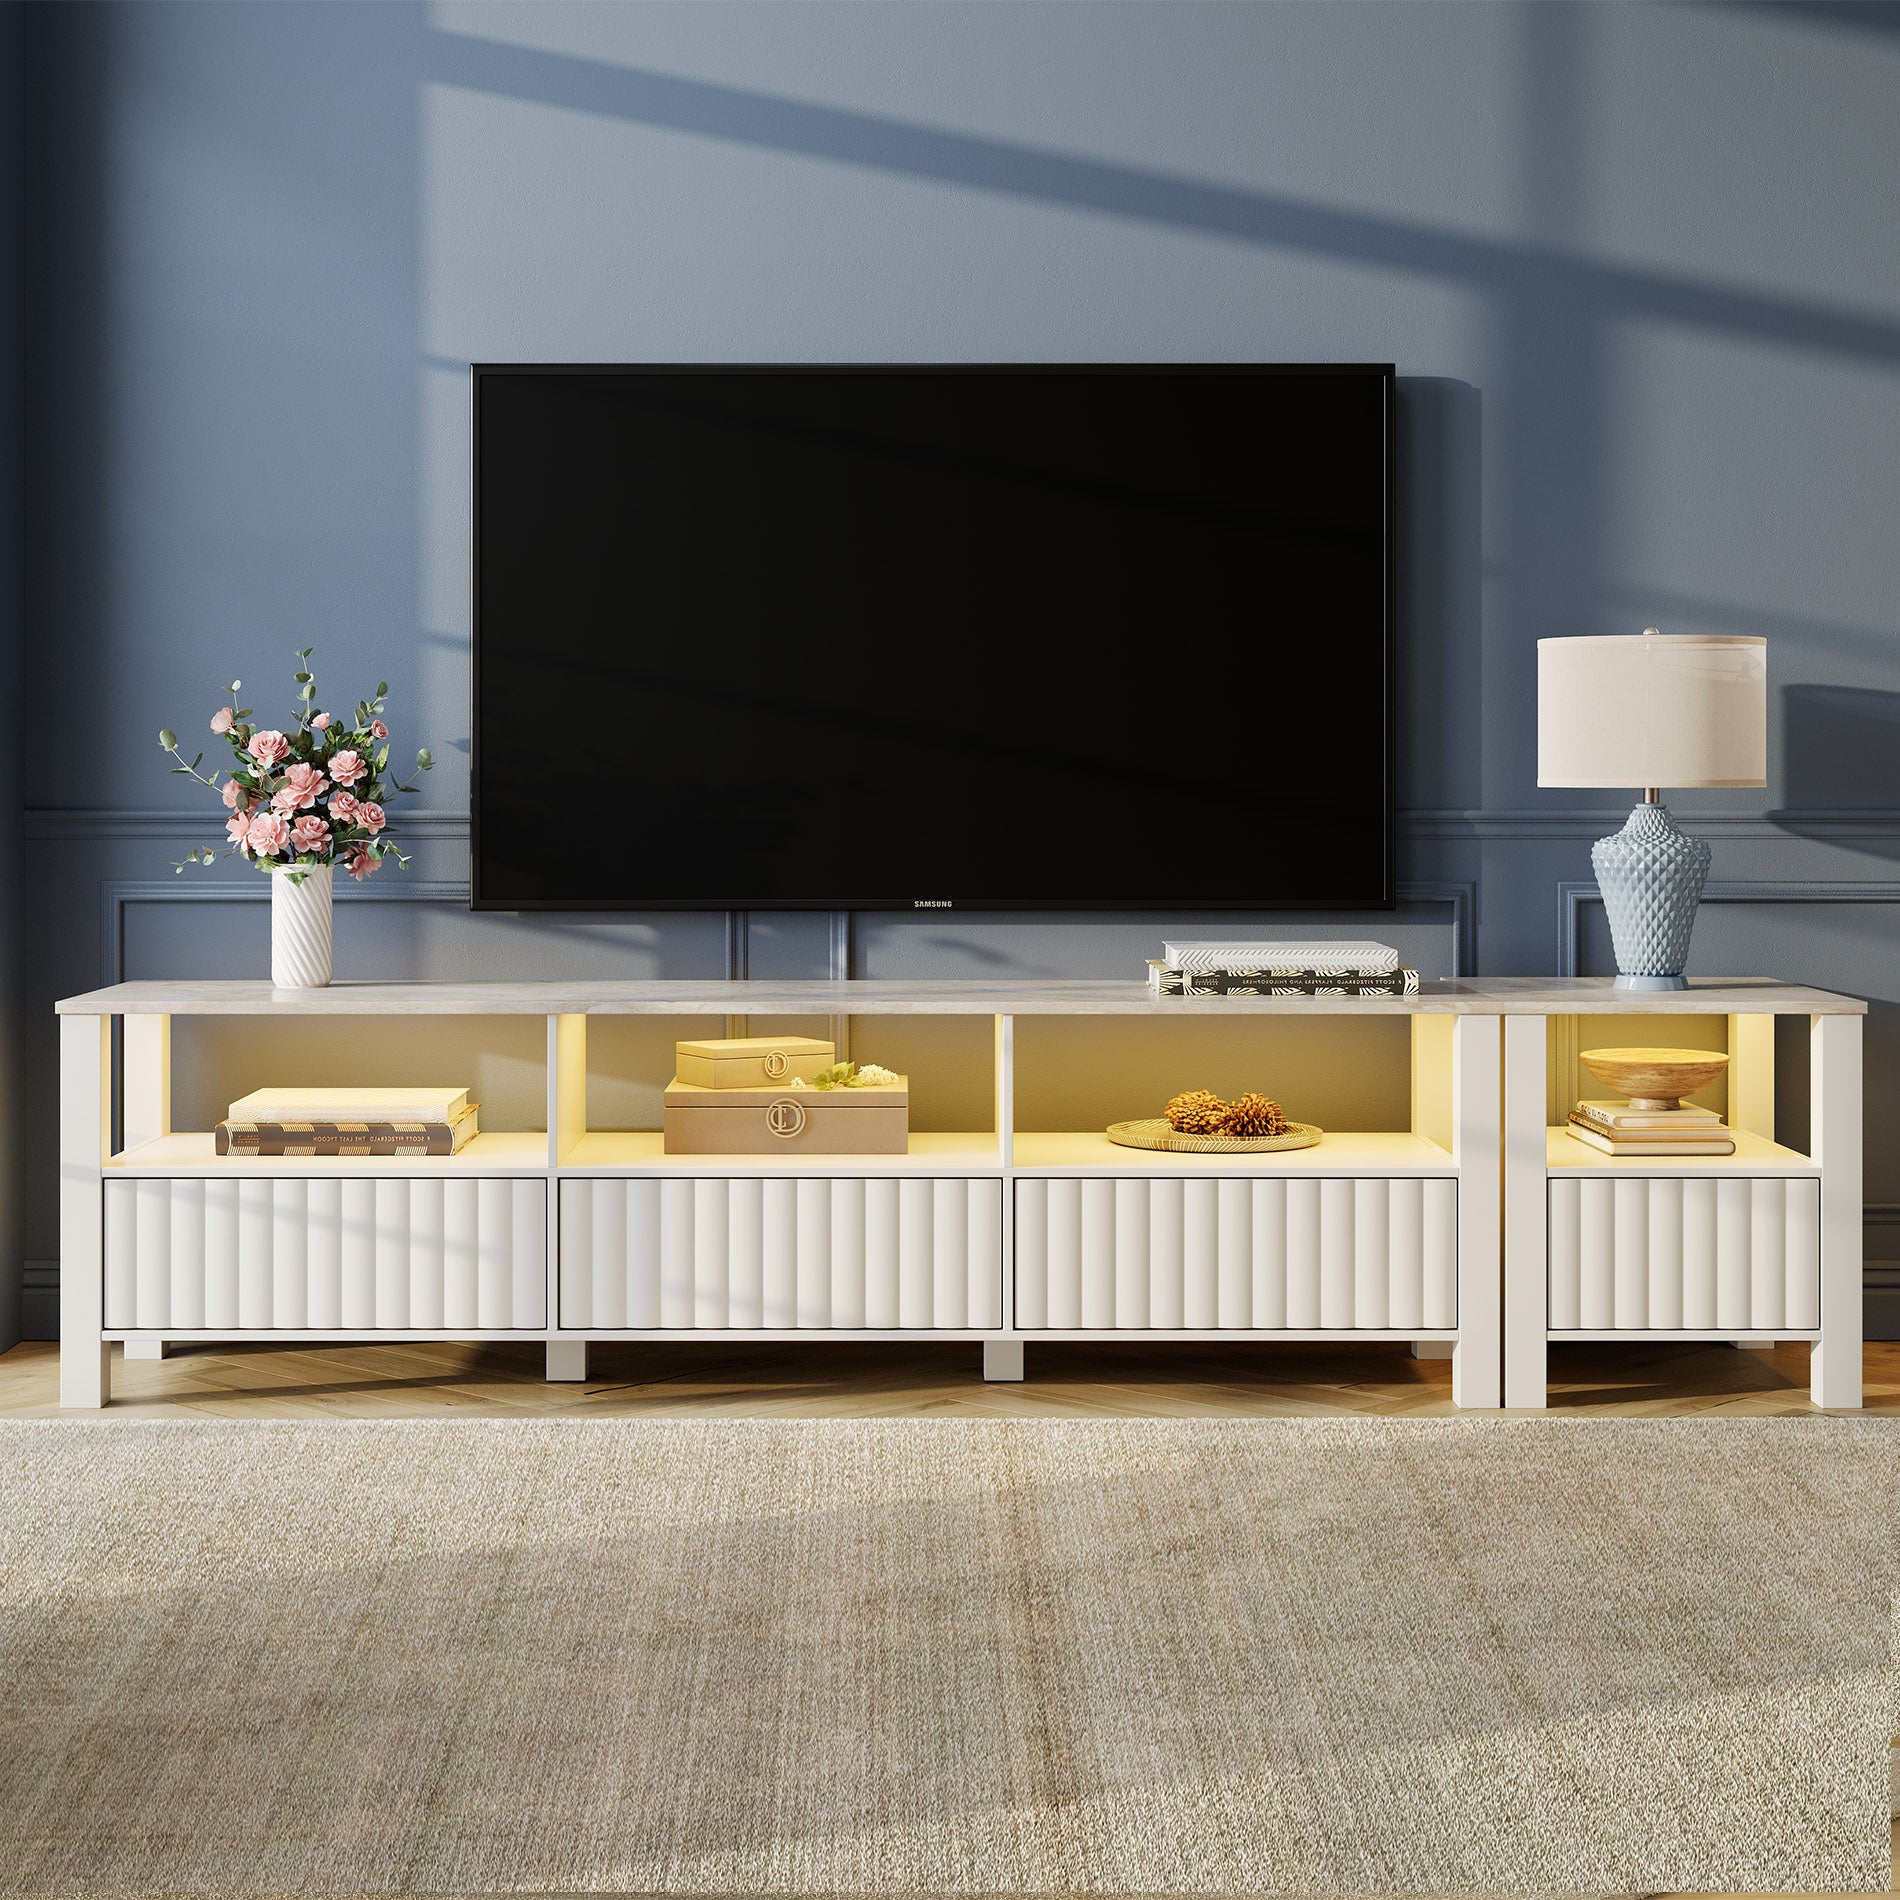 WAMPAT LED TV Stand for TVs up to 85 Inch, Modern Entertainment Center